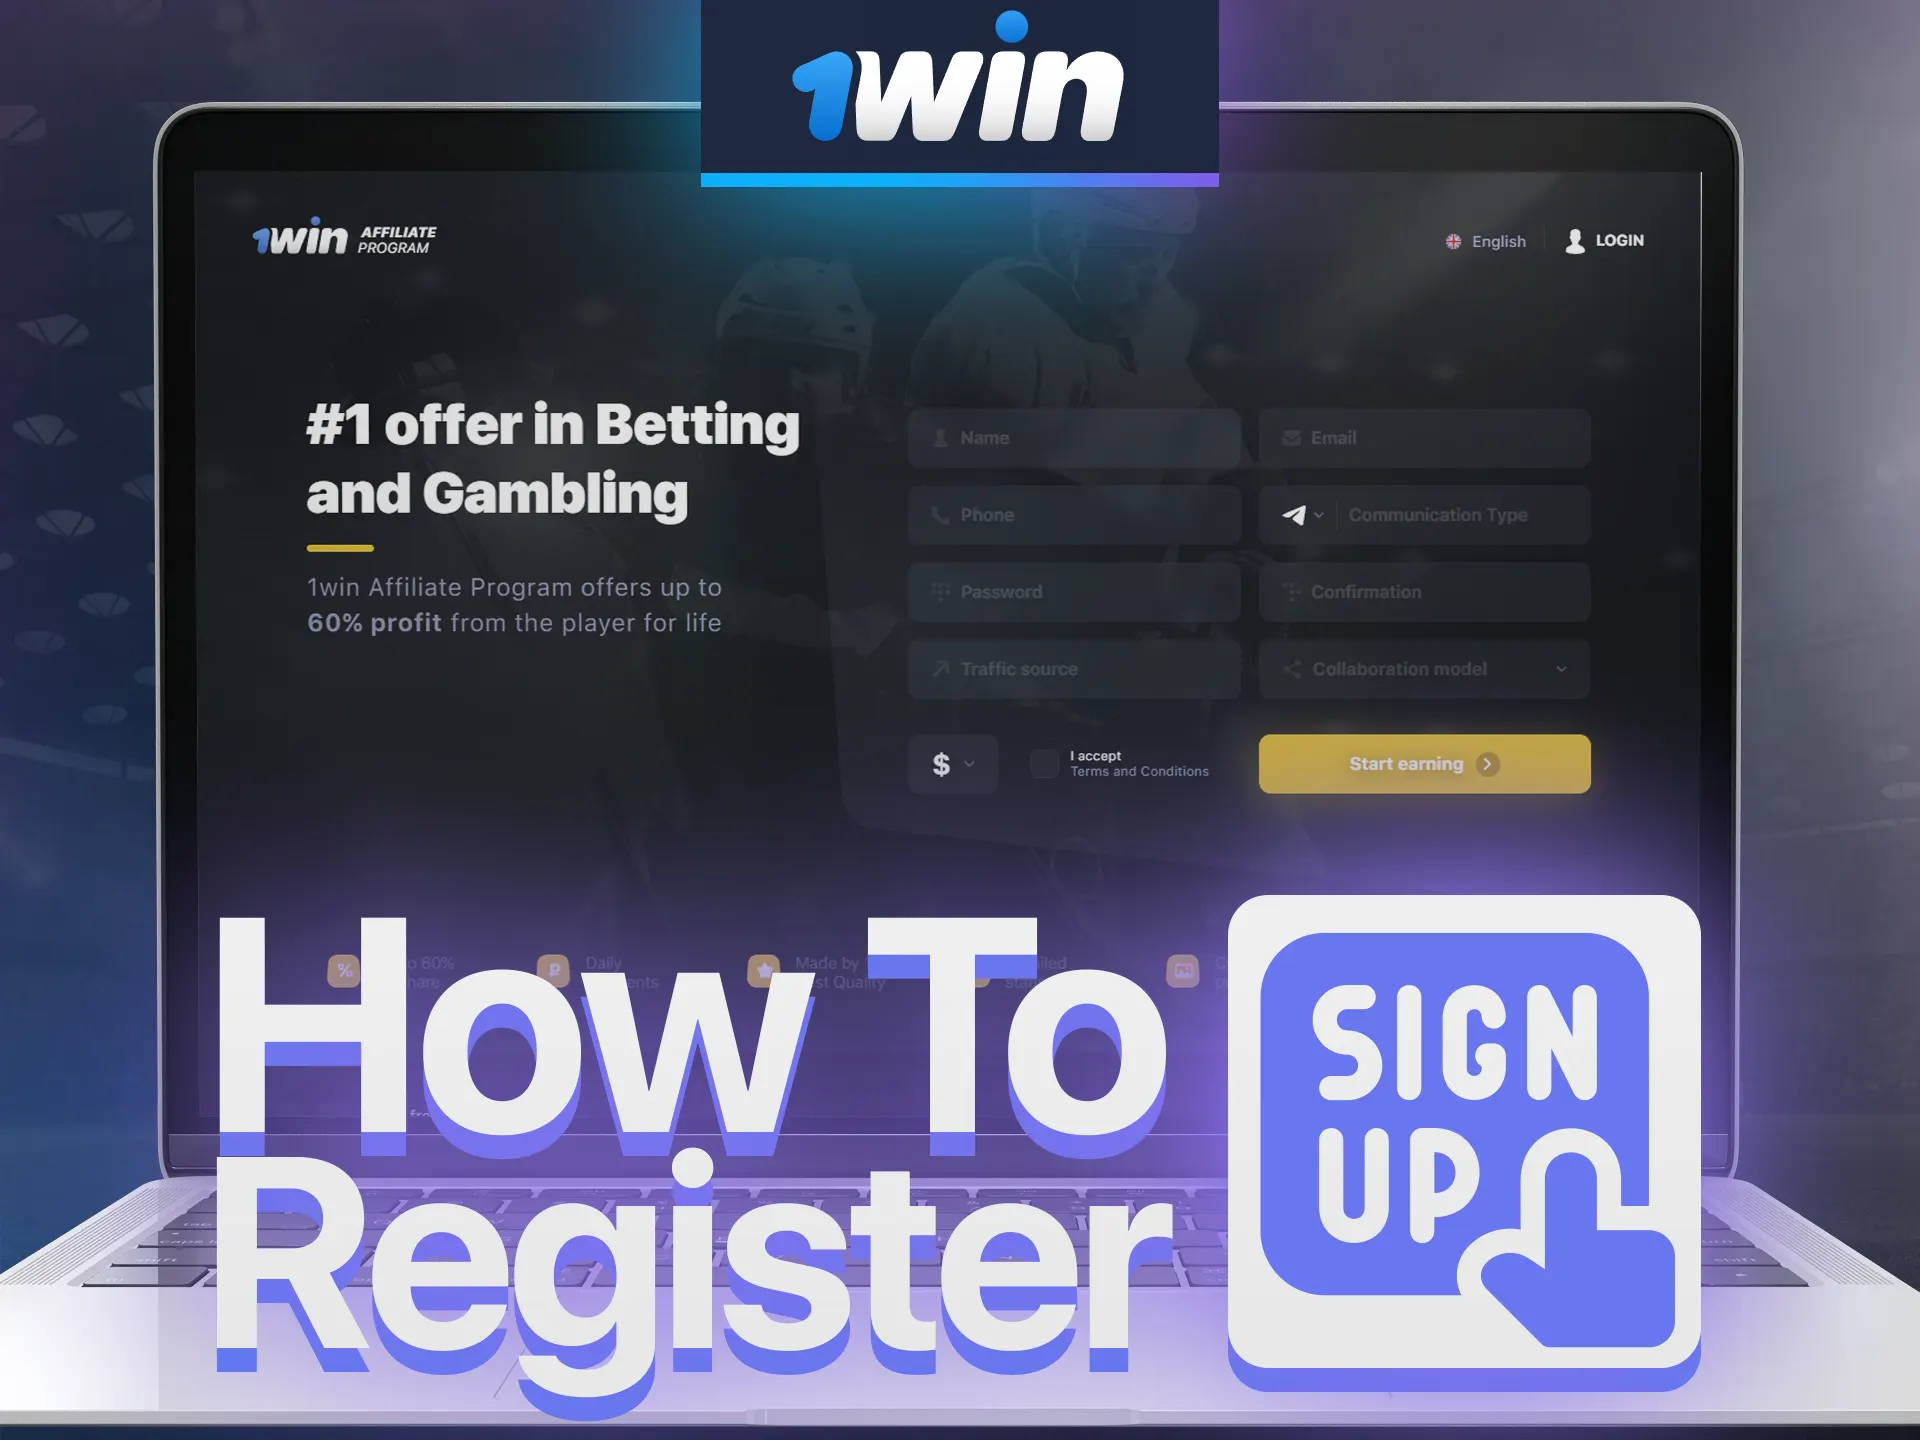 Complete a simple registration to become a 1Win partner.